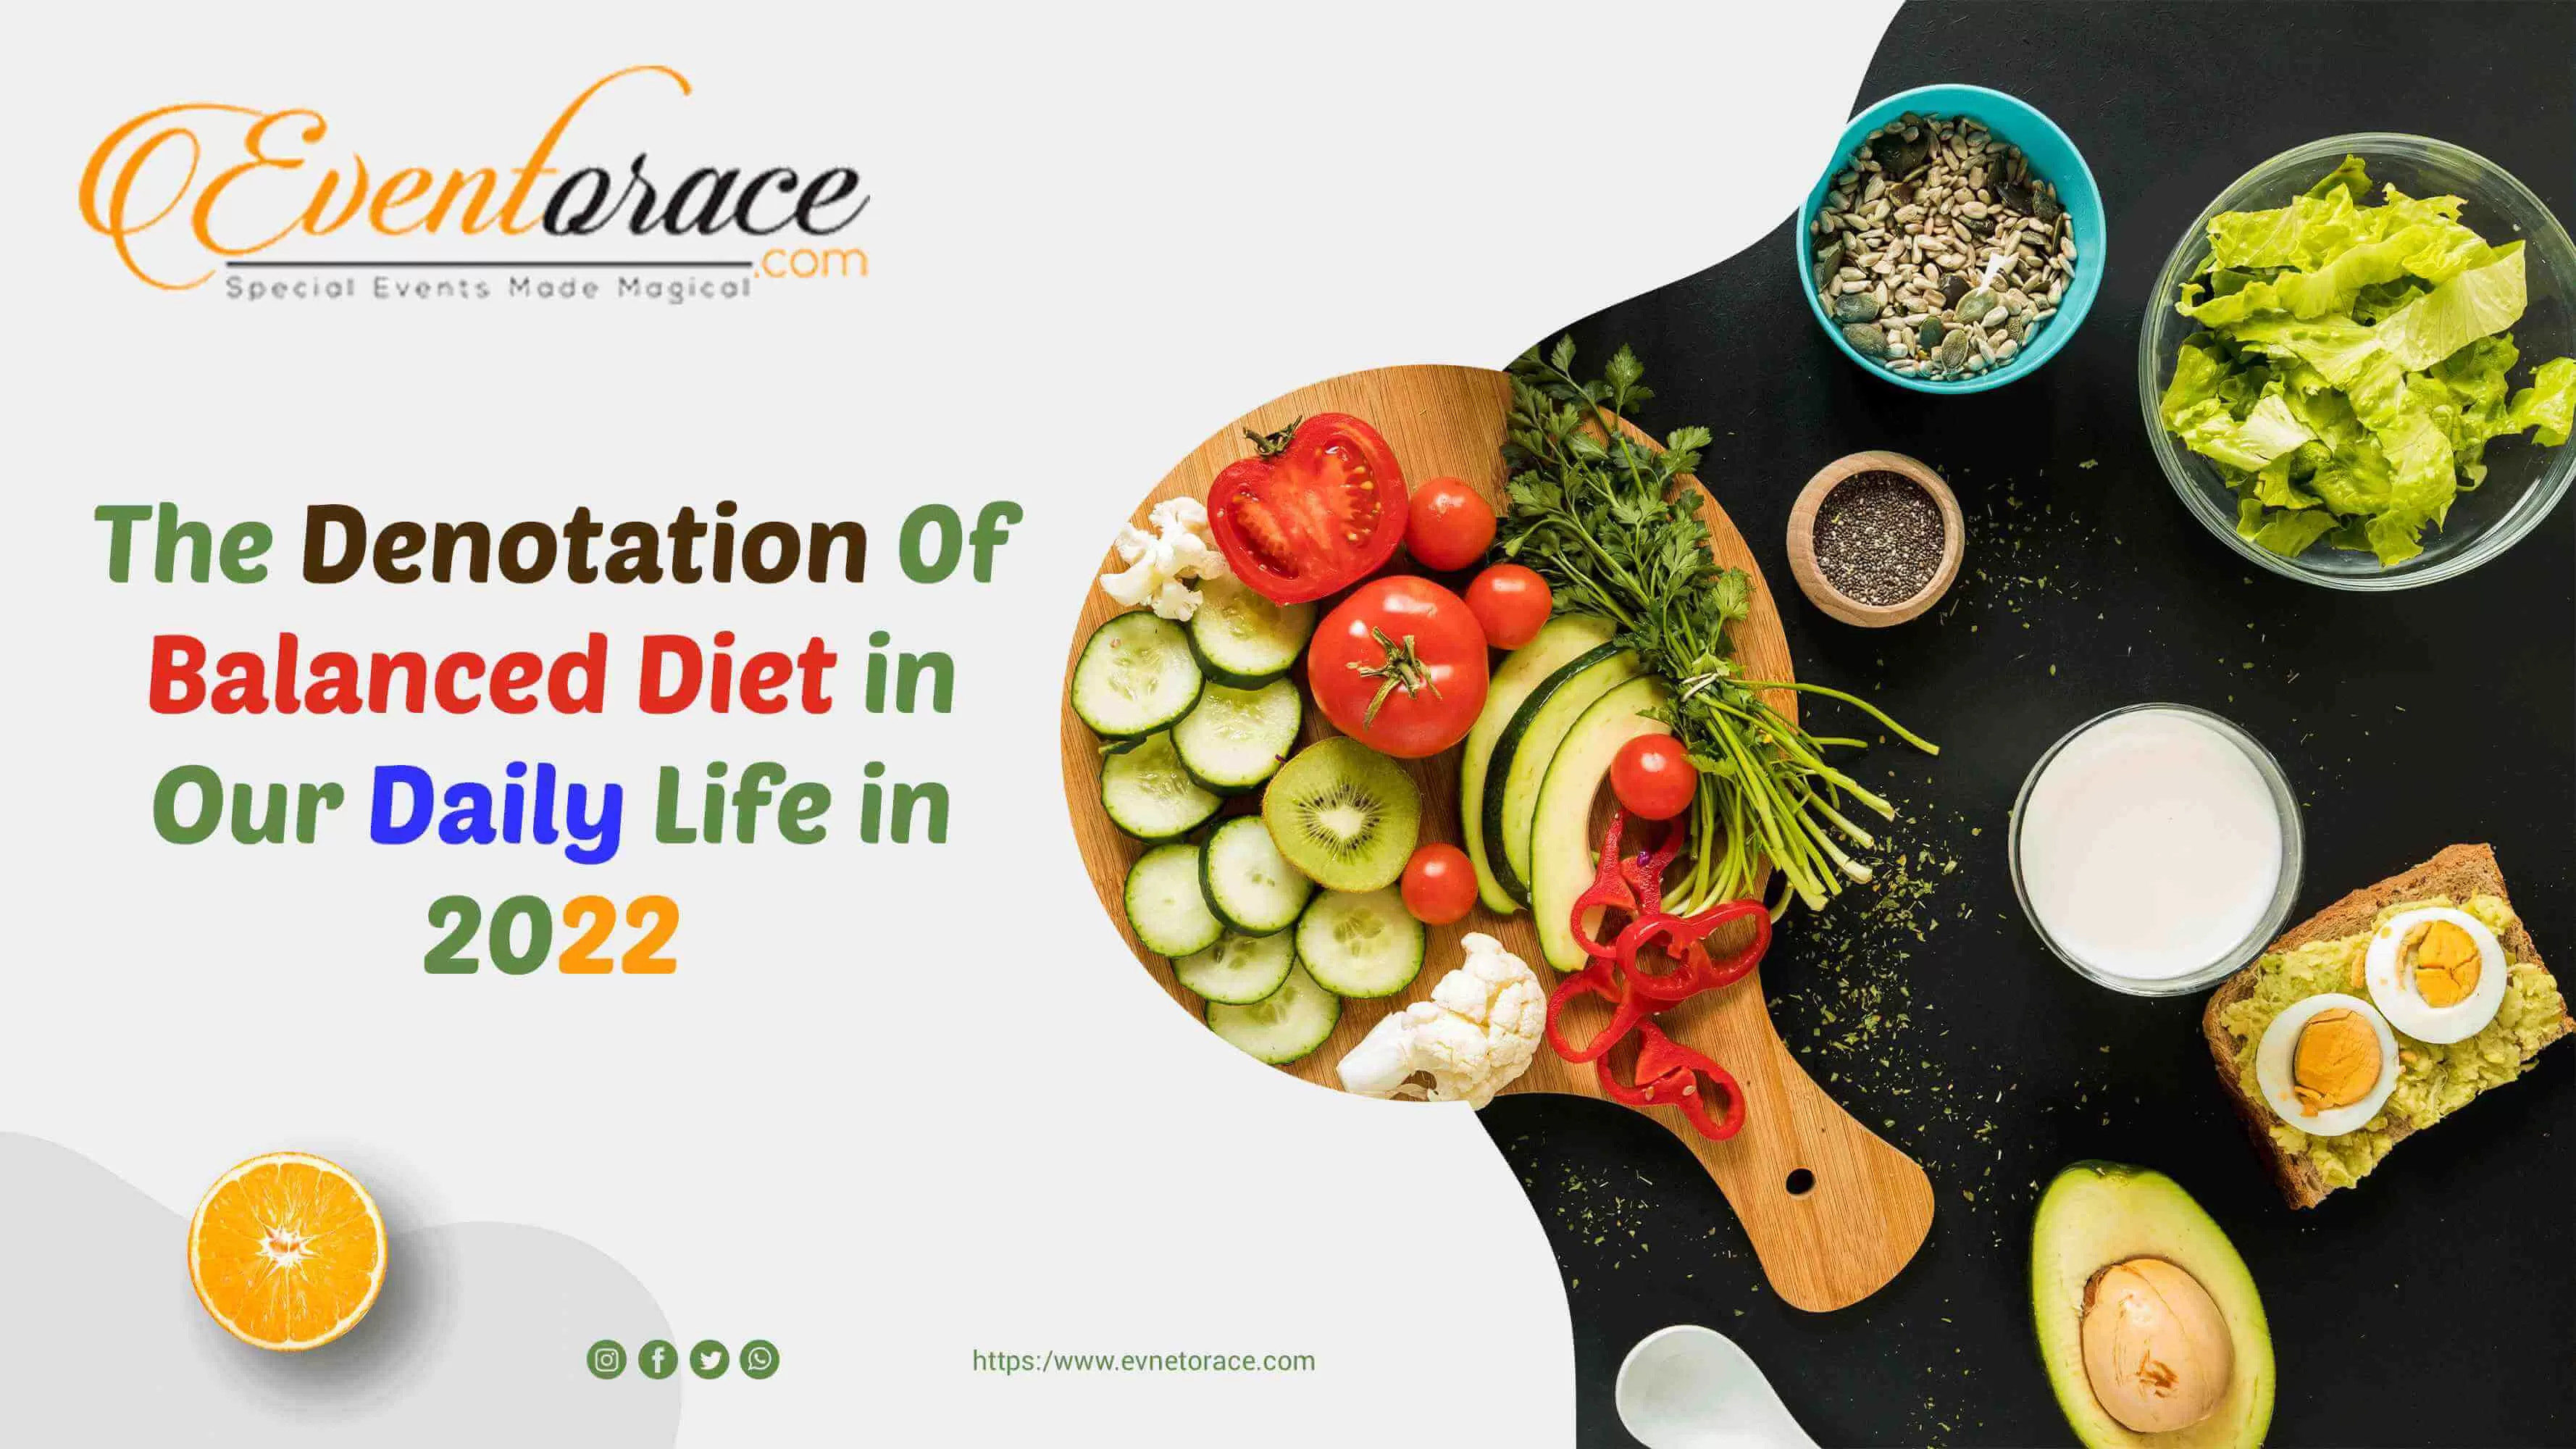 The Denotation of Balanced Diet in Our Daily Life in 2022